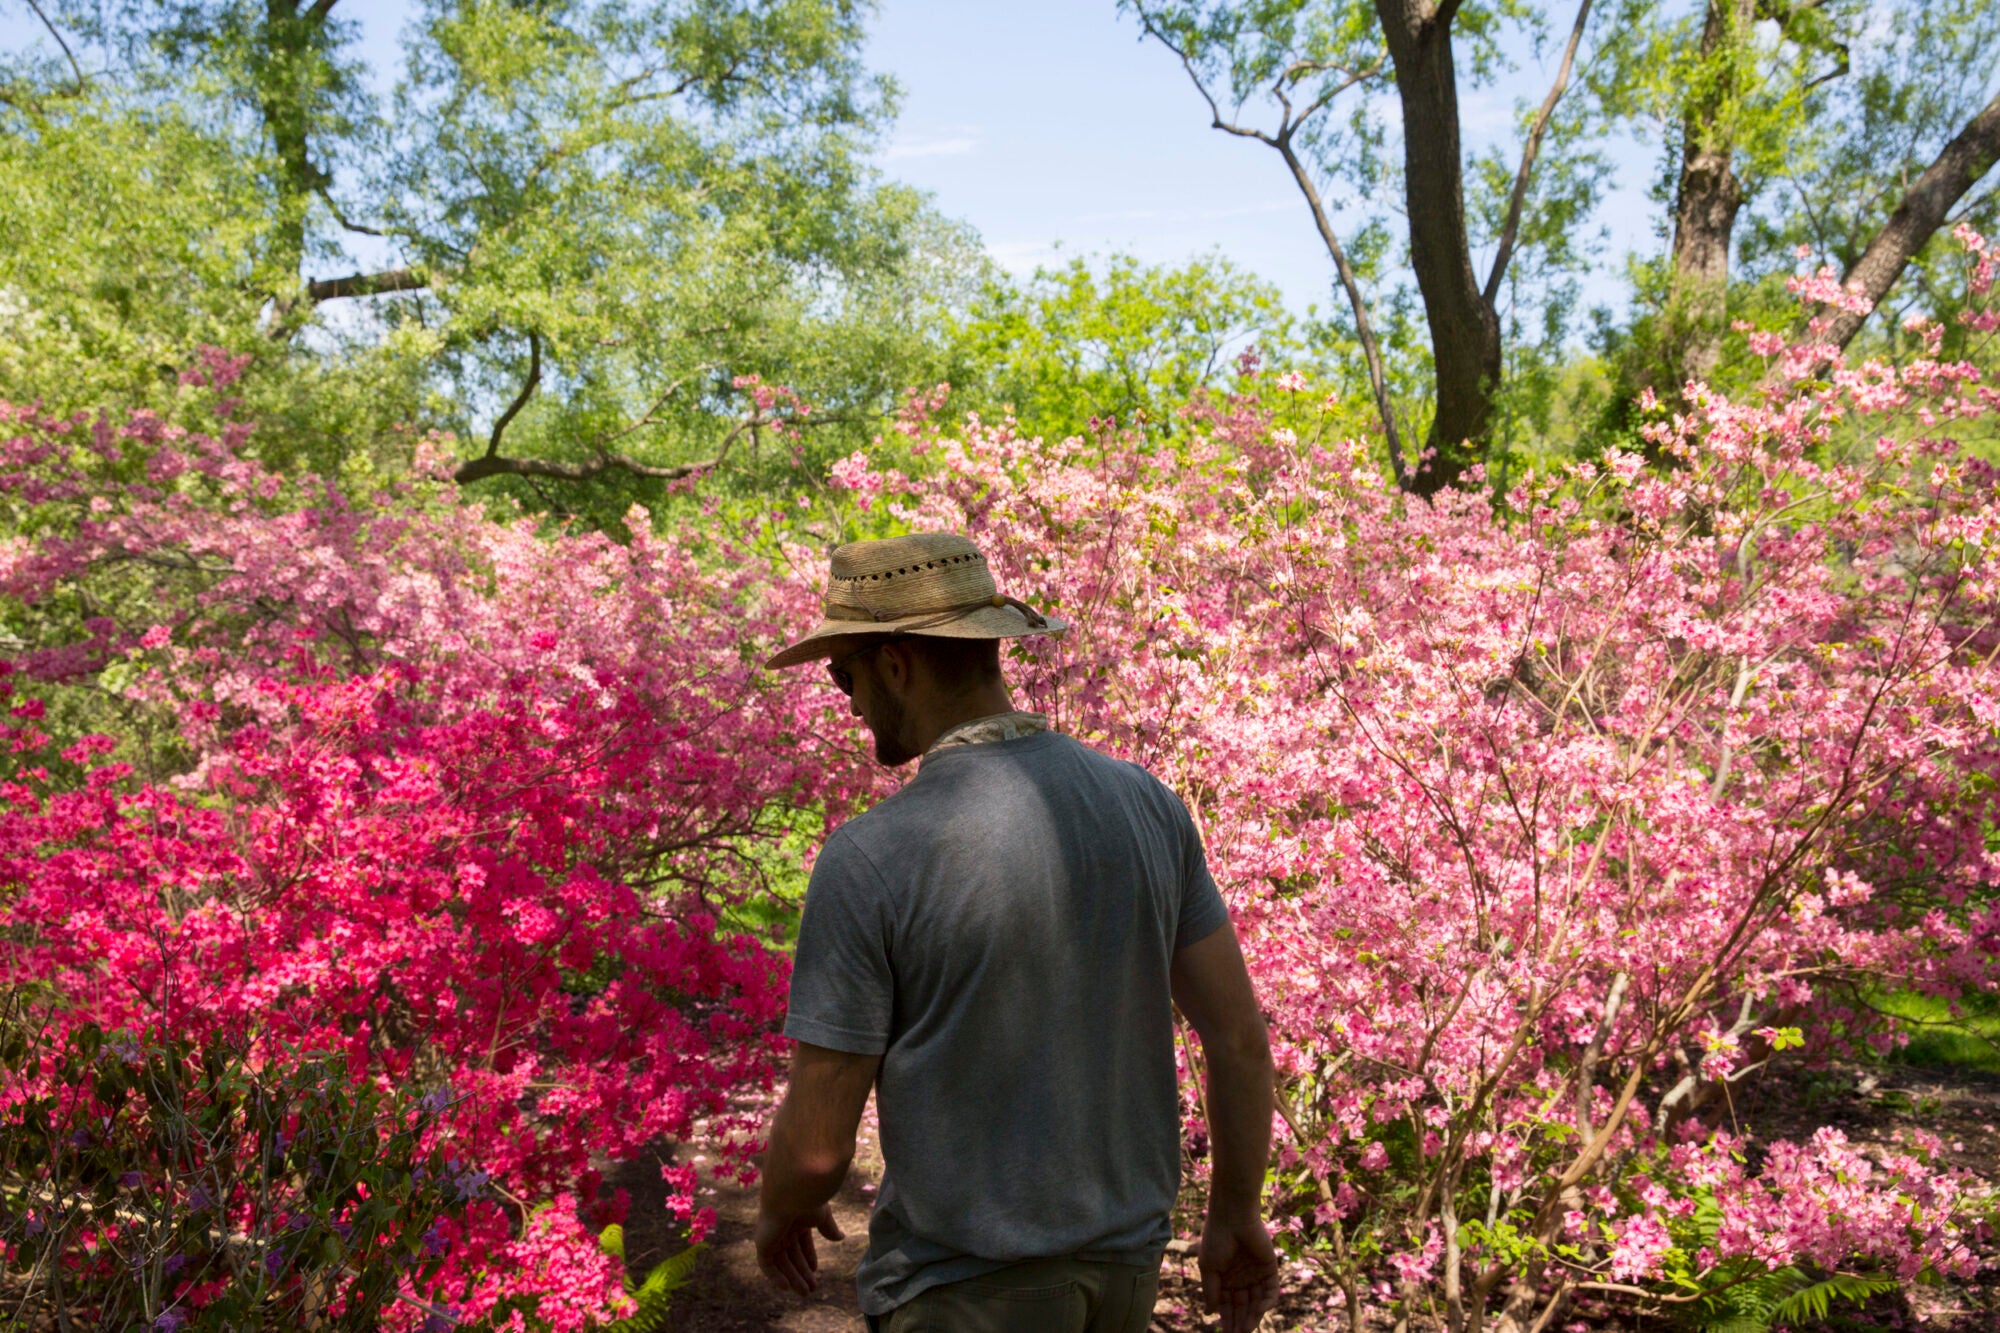 A man wearing a hat prunes the branches of a blooming tree